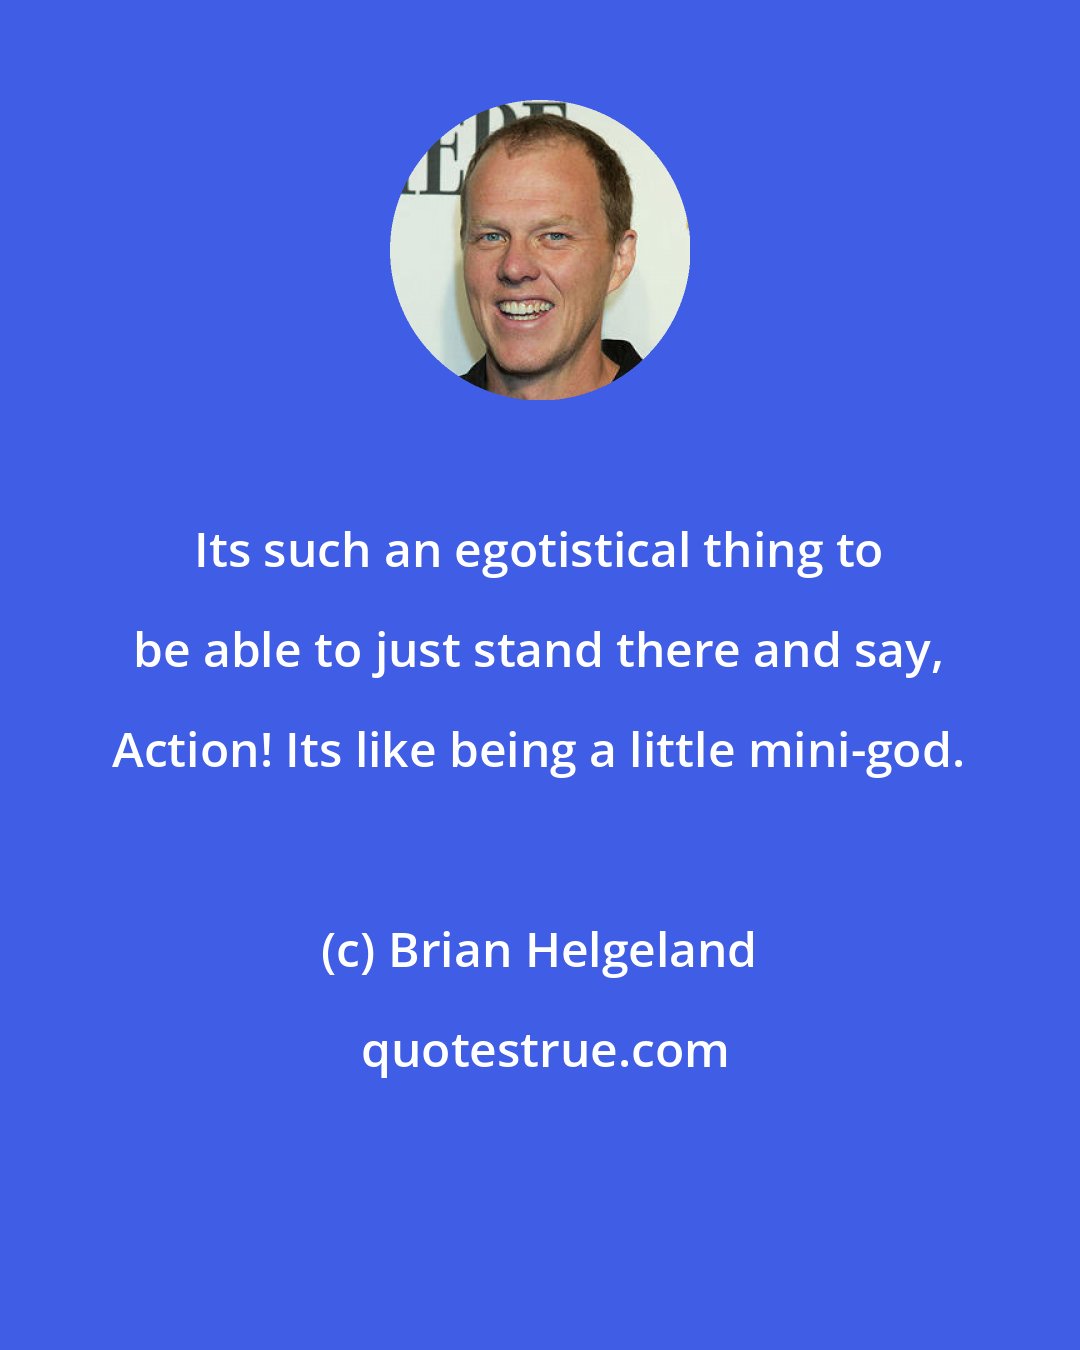 Brian Helgeland: Its such an egotistical thing to be able to just stand there and say, Action! Its like being a little mini-god.